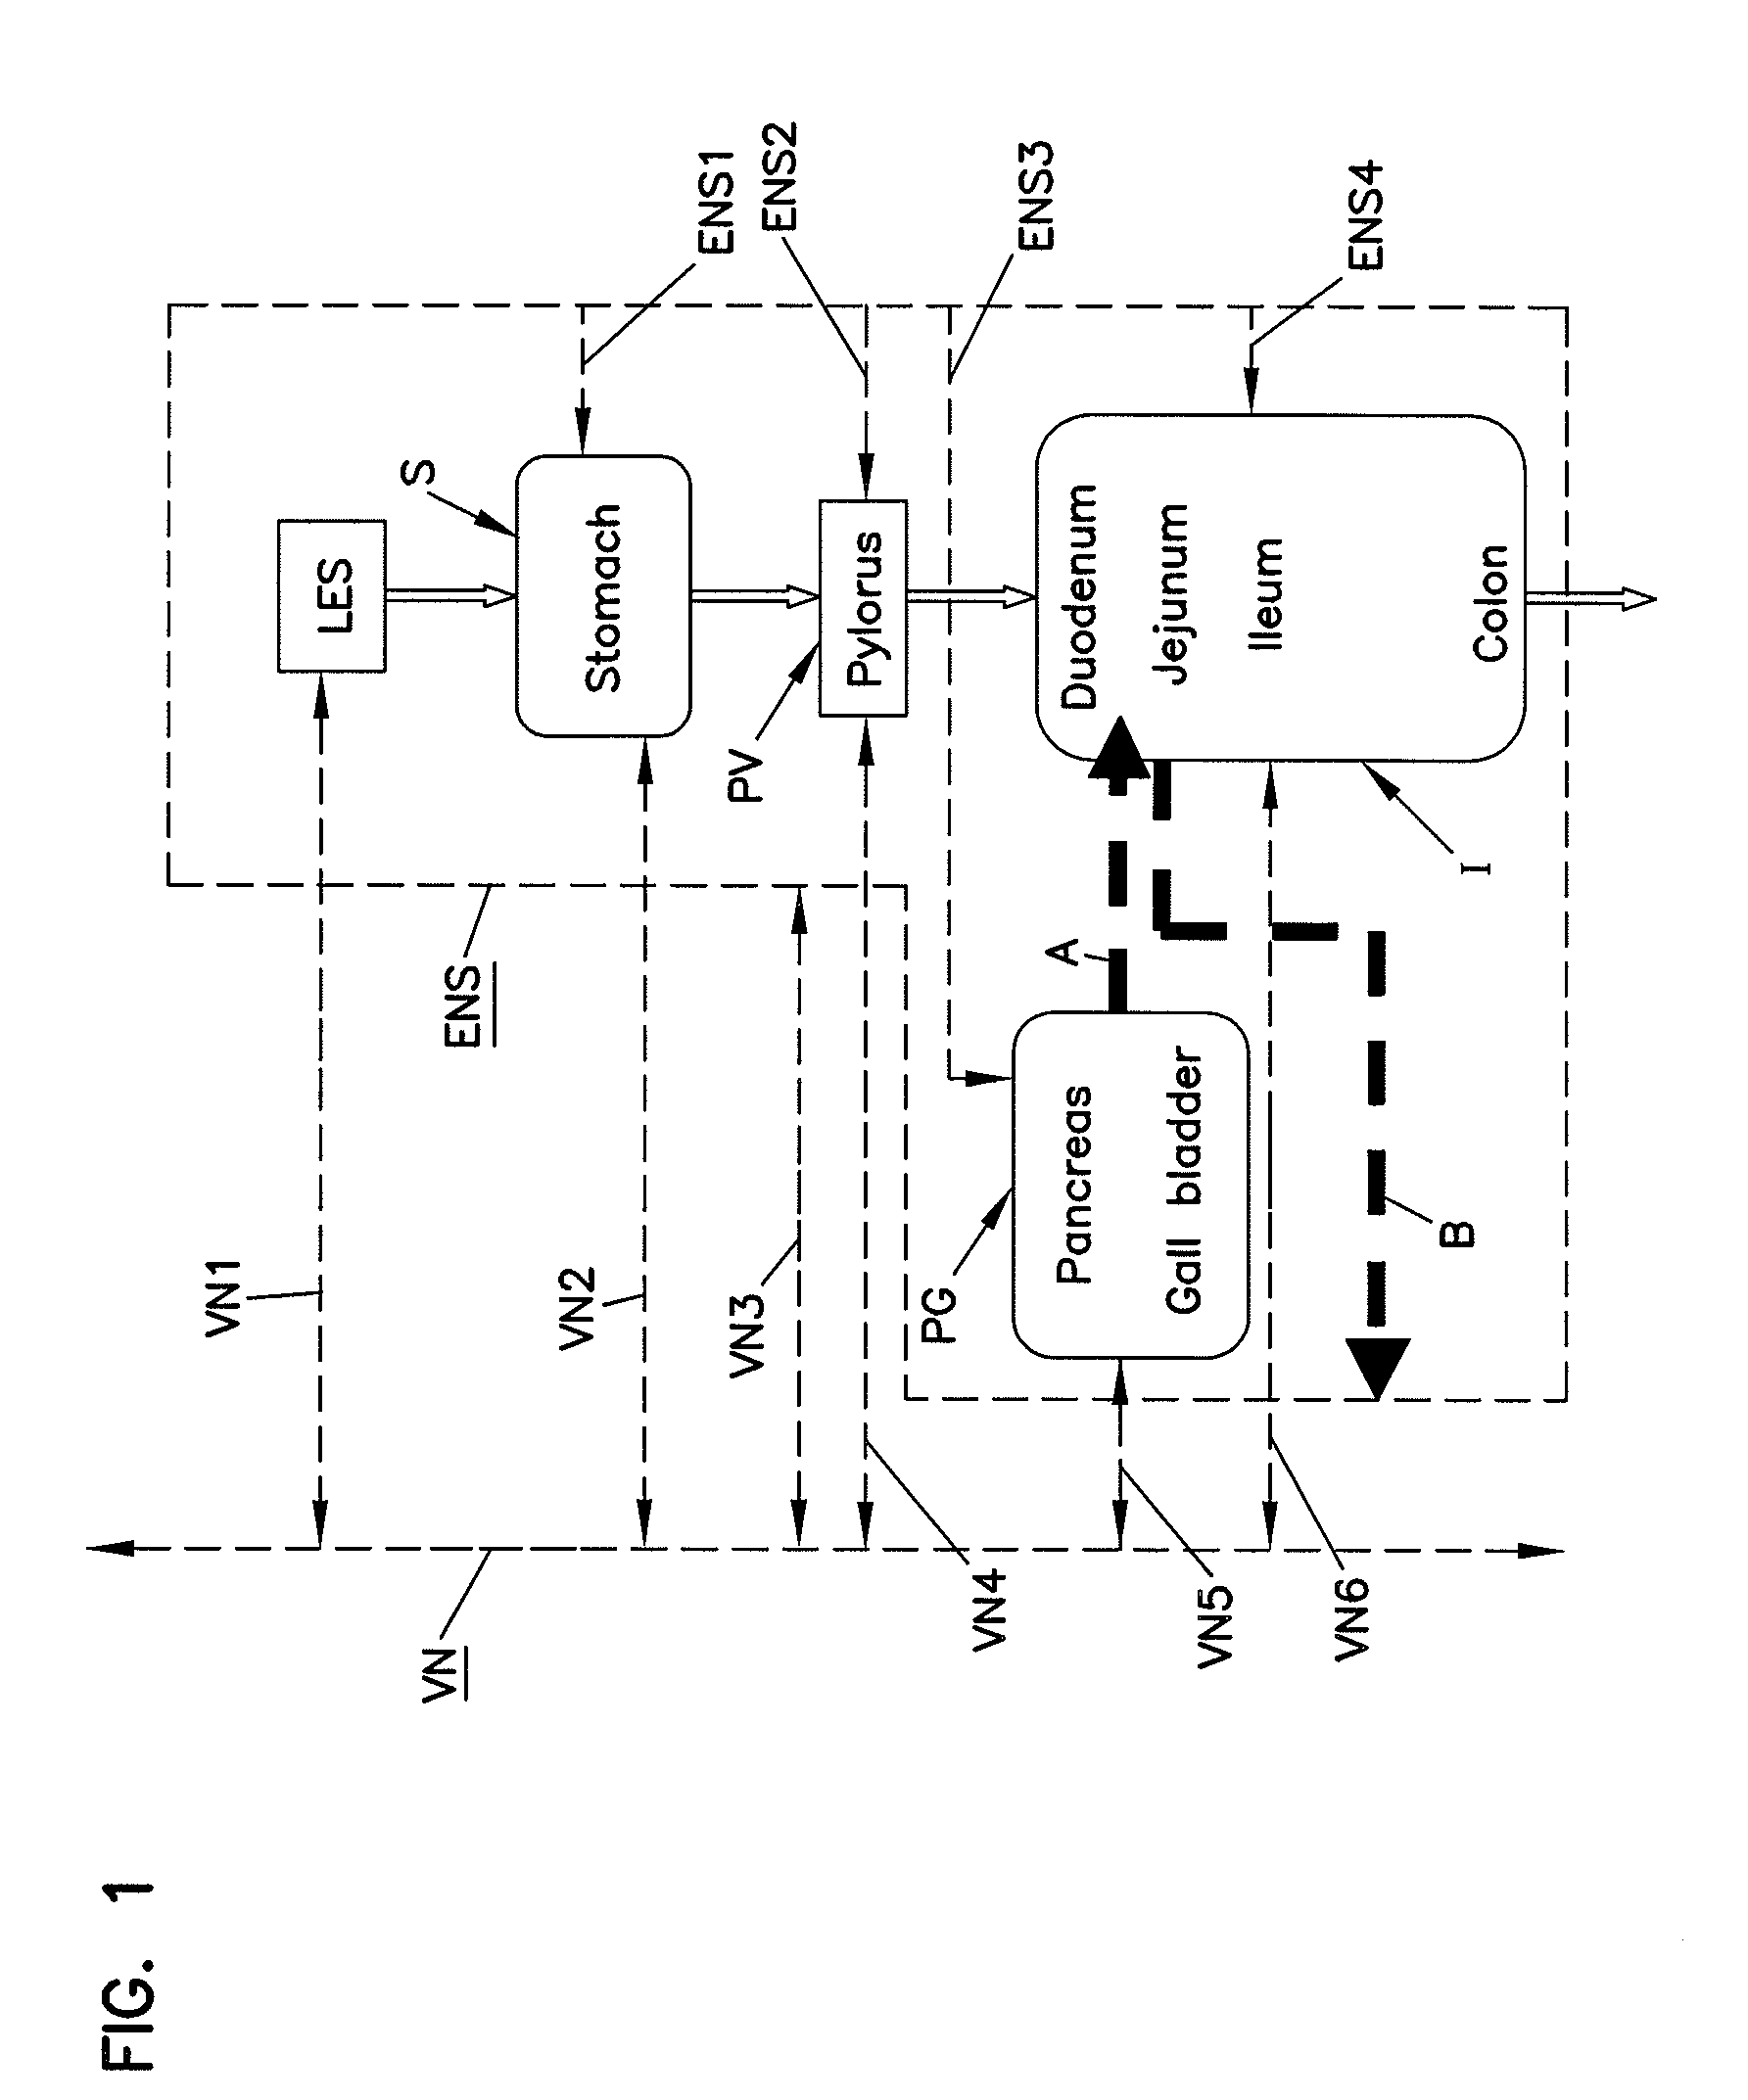 Methods and systems for glucose regulation